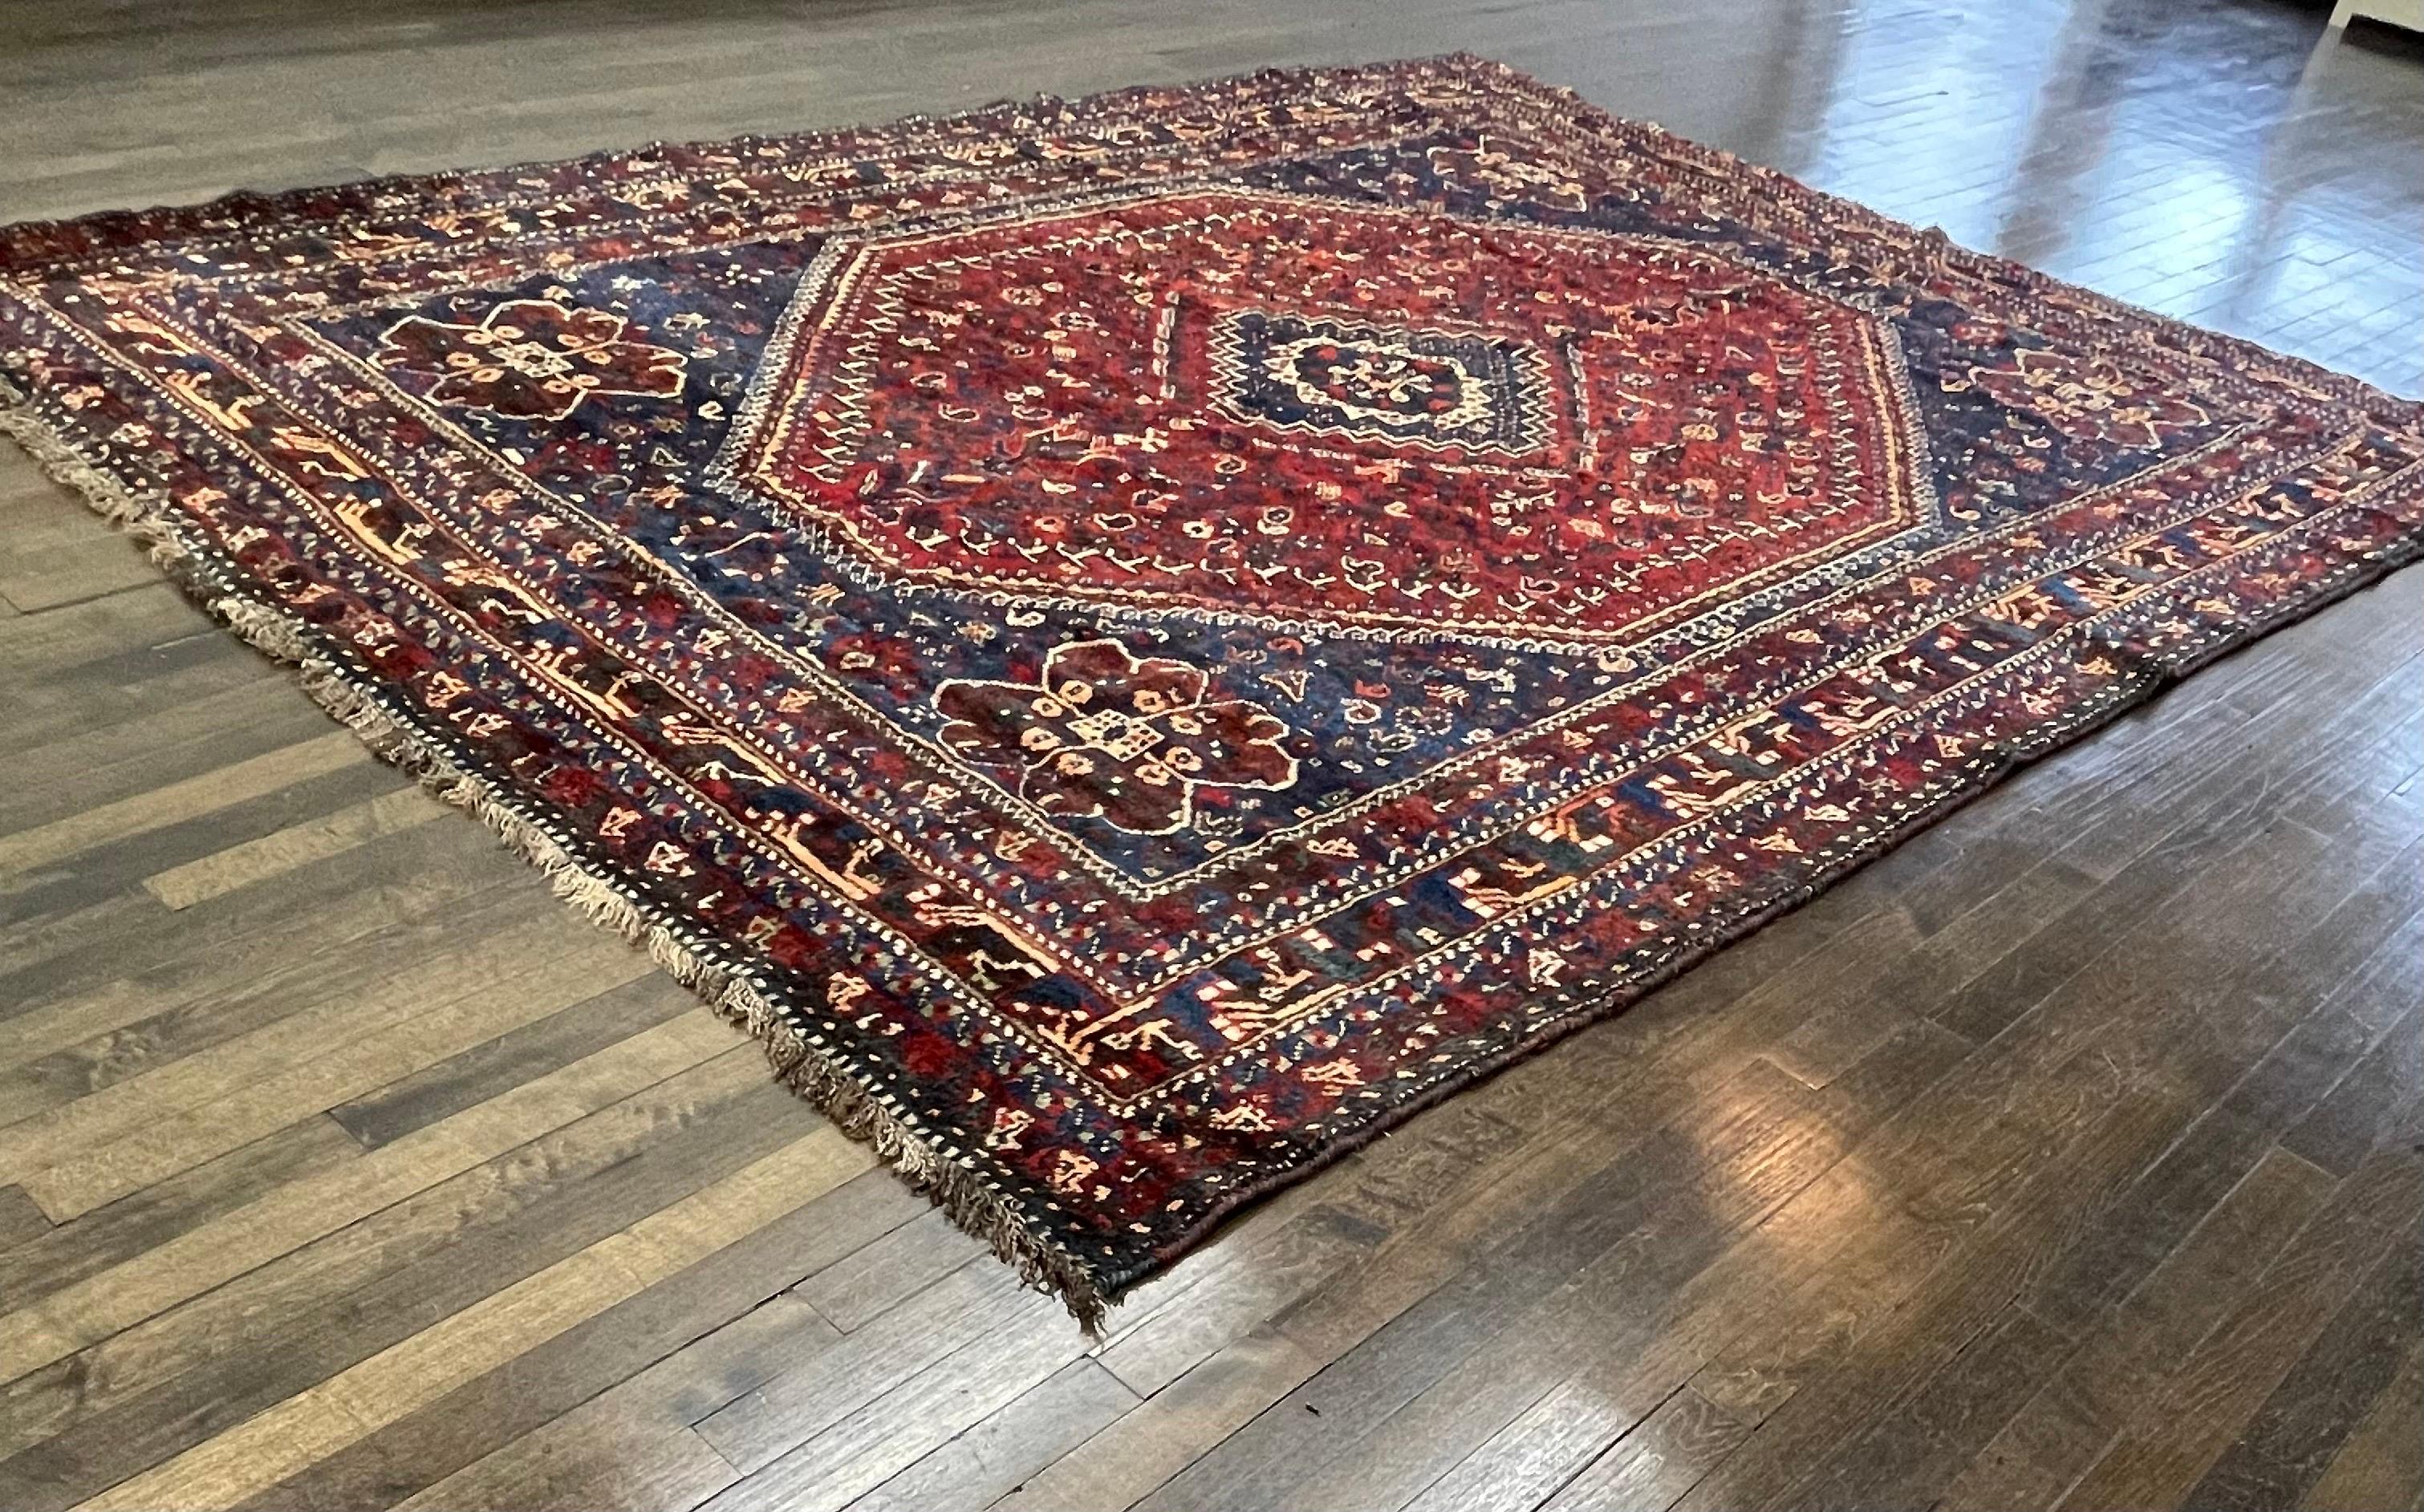 Handwoven in southern Persia this carpet is a beautiful example of Afshar tribe weaving. The solar Turkman gul dominate the center field surrounded with lots of tribal symbols.

The soft wool used to make this carpet, both to make the foundation